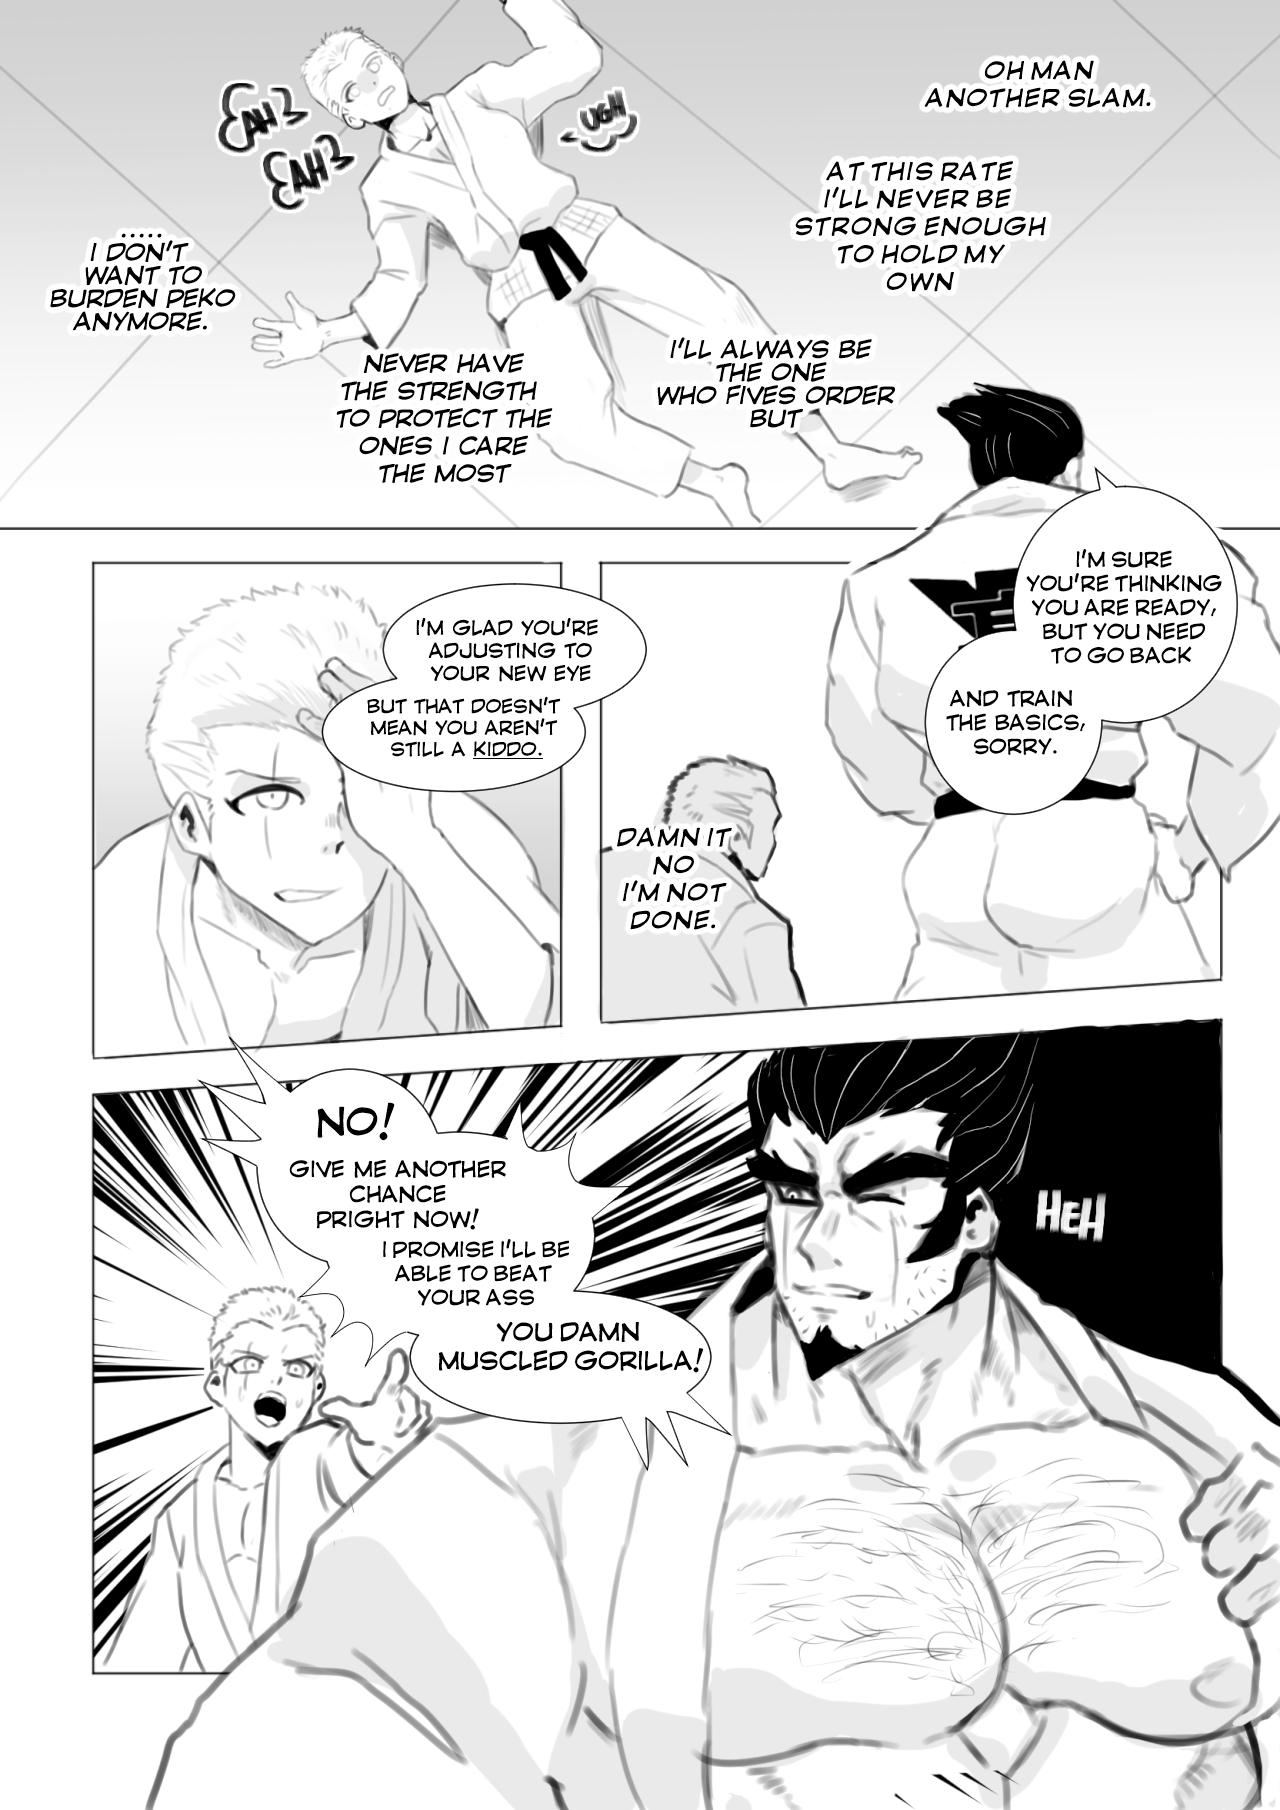 Sologirl Pushing to the limits - Danganronpa Blow Job Contest - Page 7